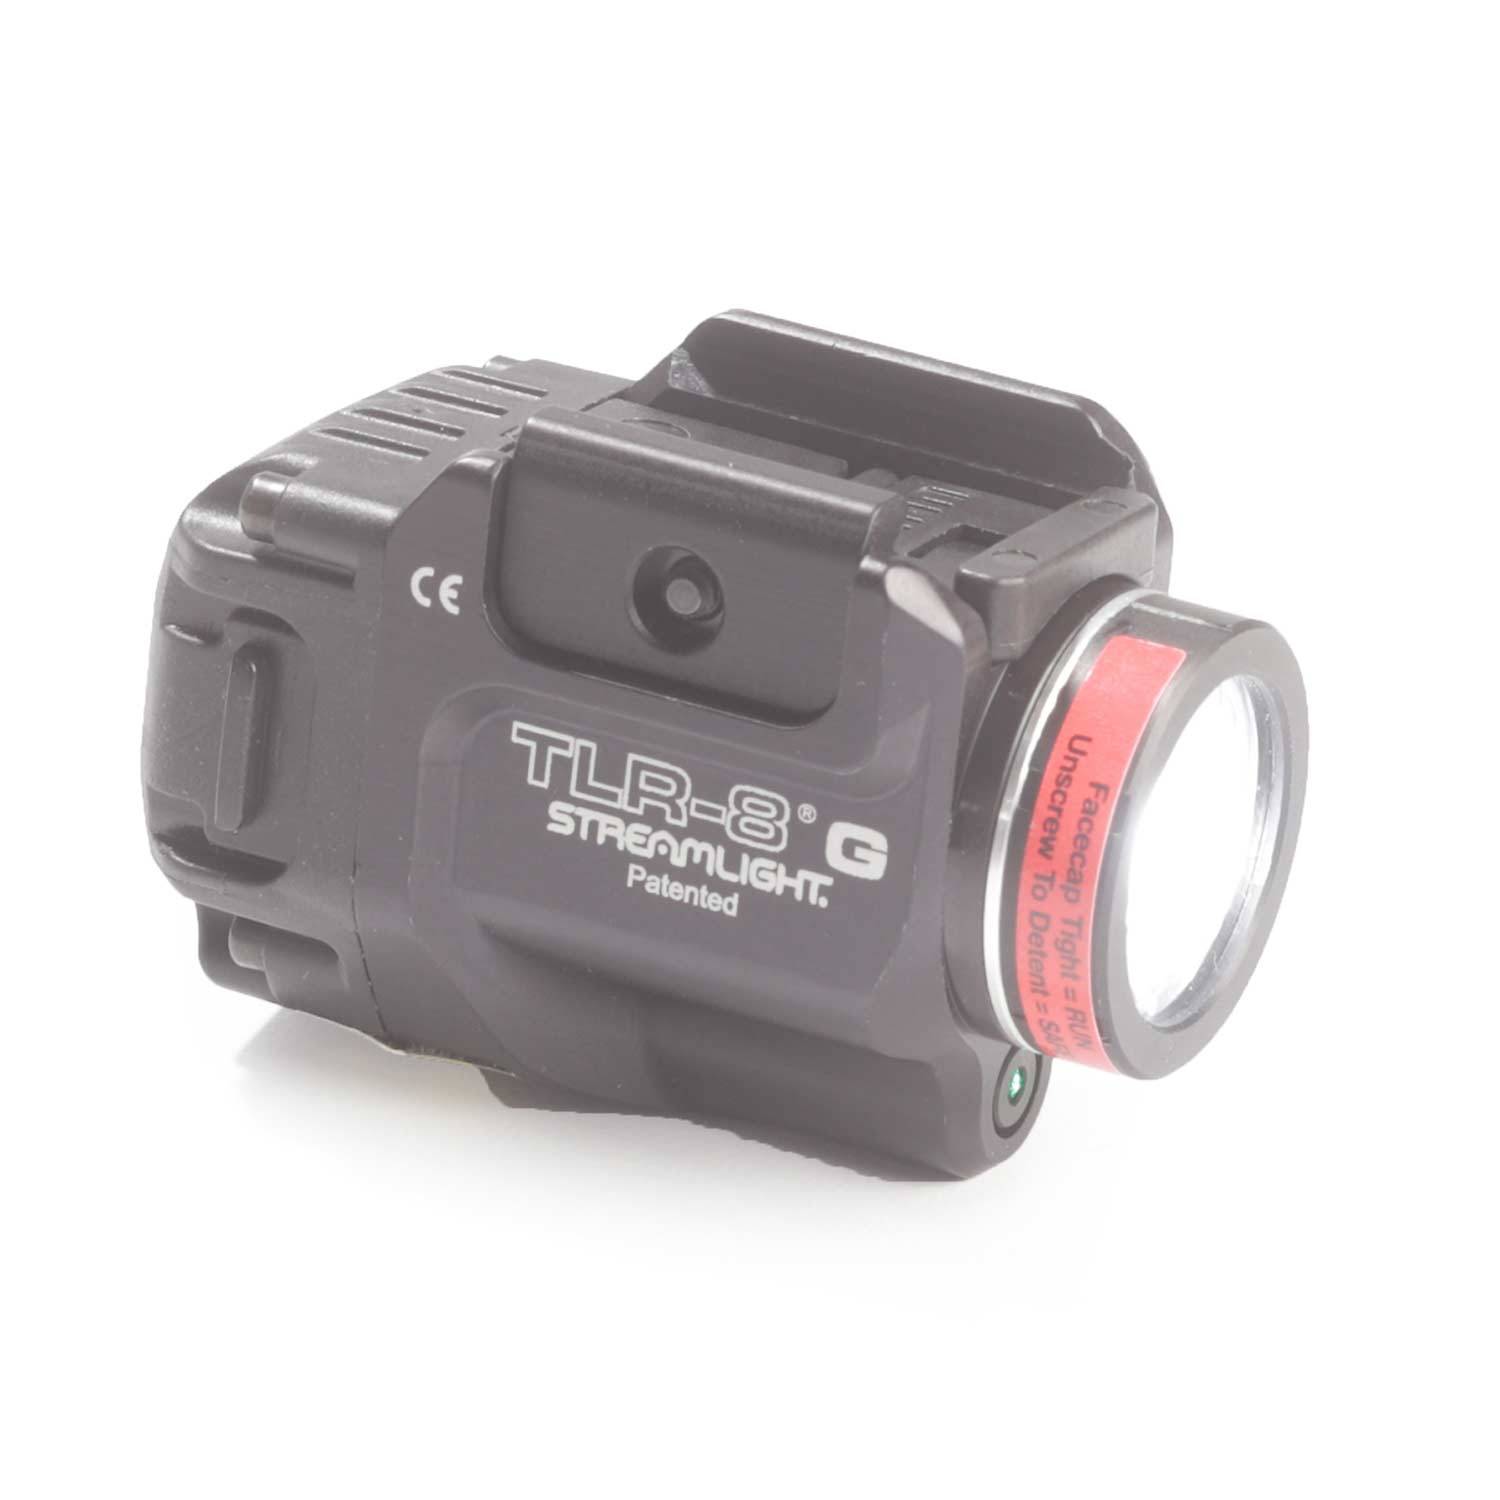 Streamlight TLR-8 G Gun Light with Green Laser and Side Switch for sale online 